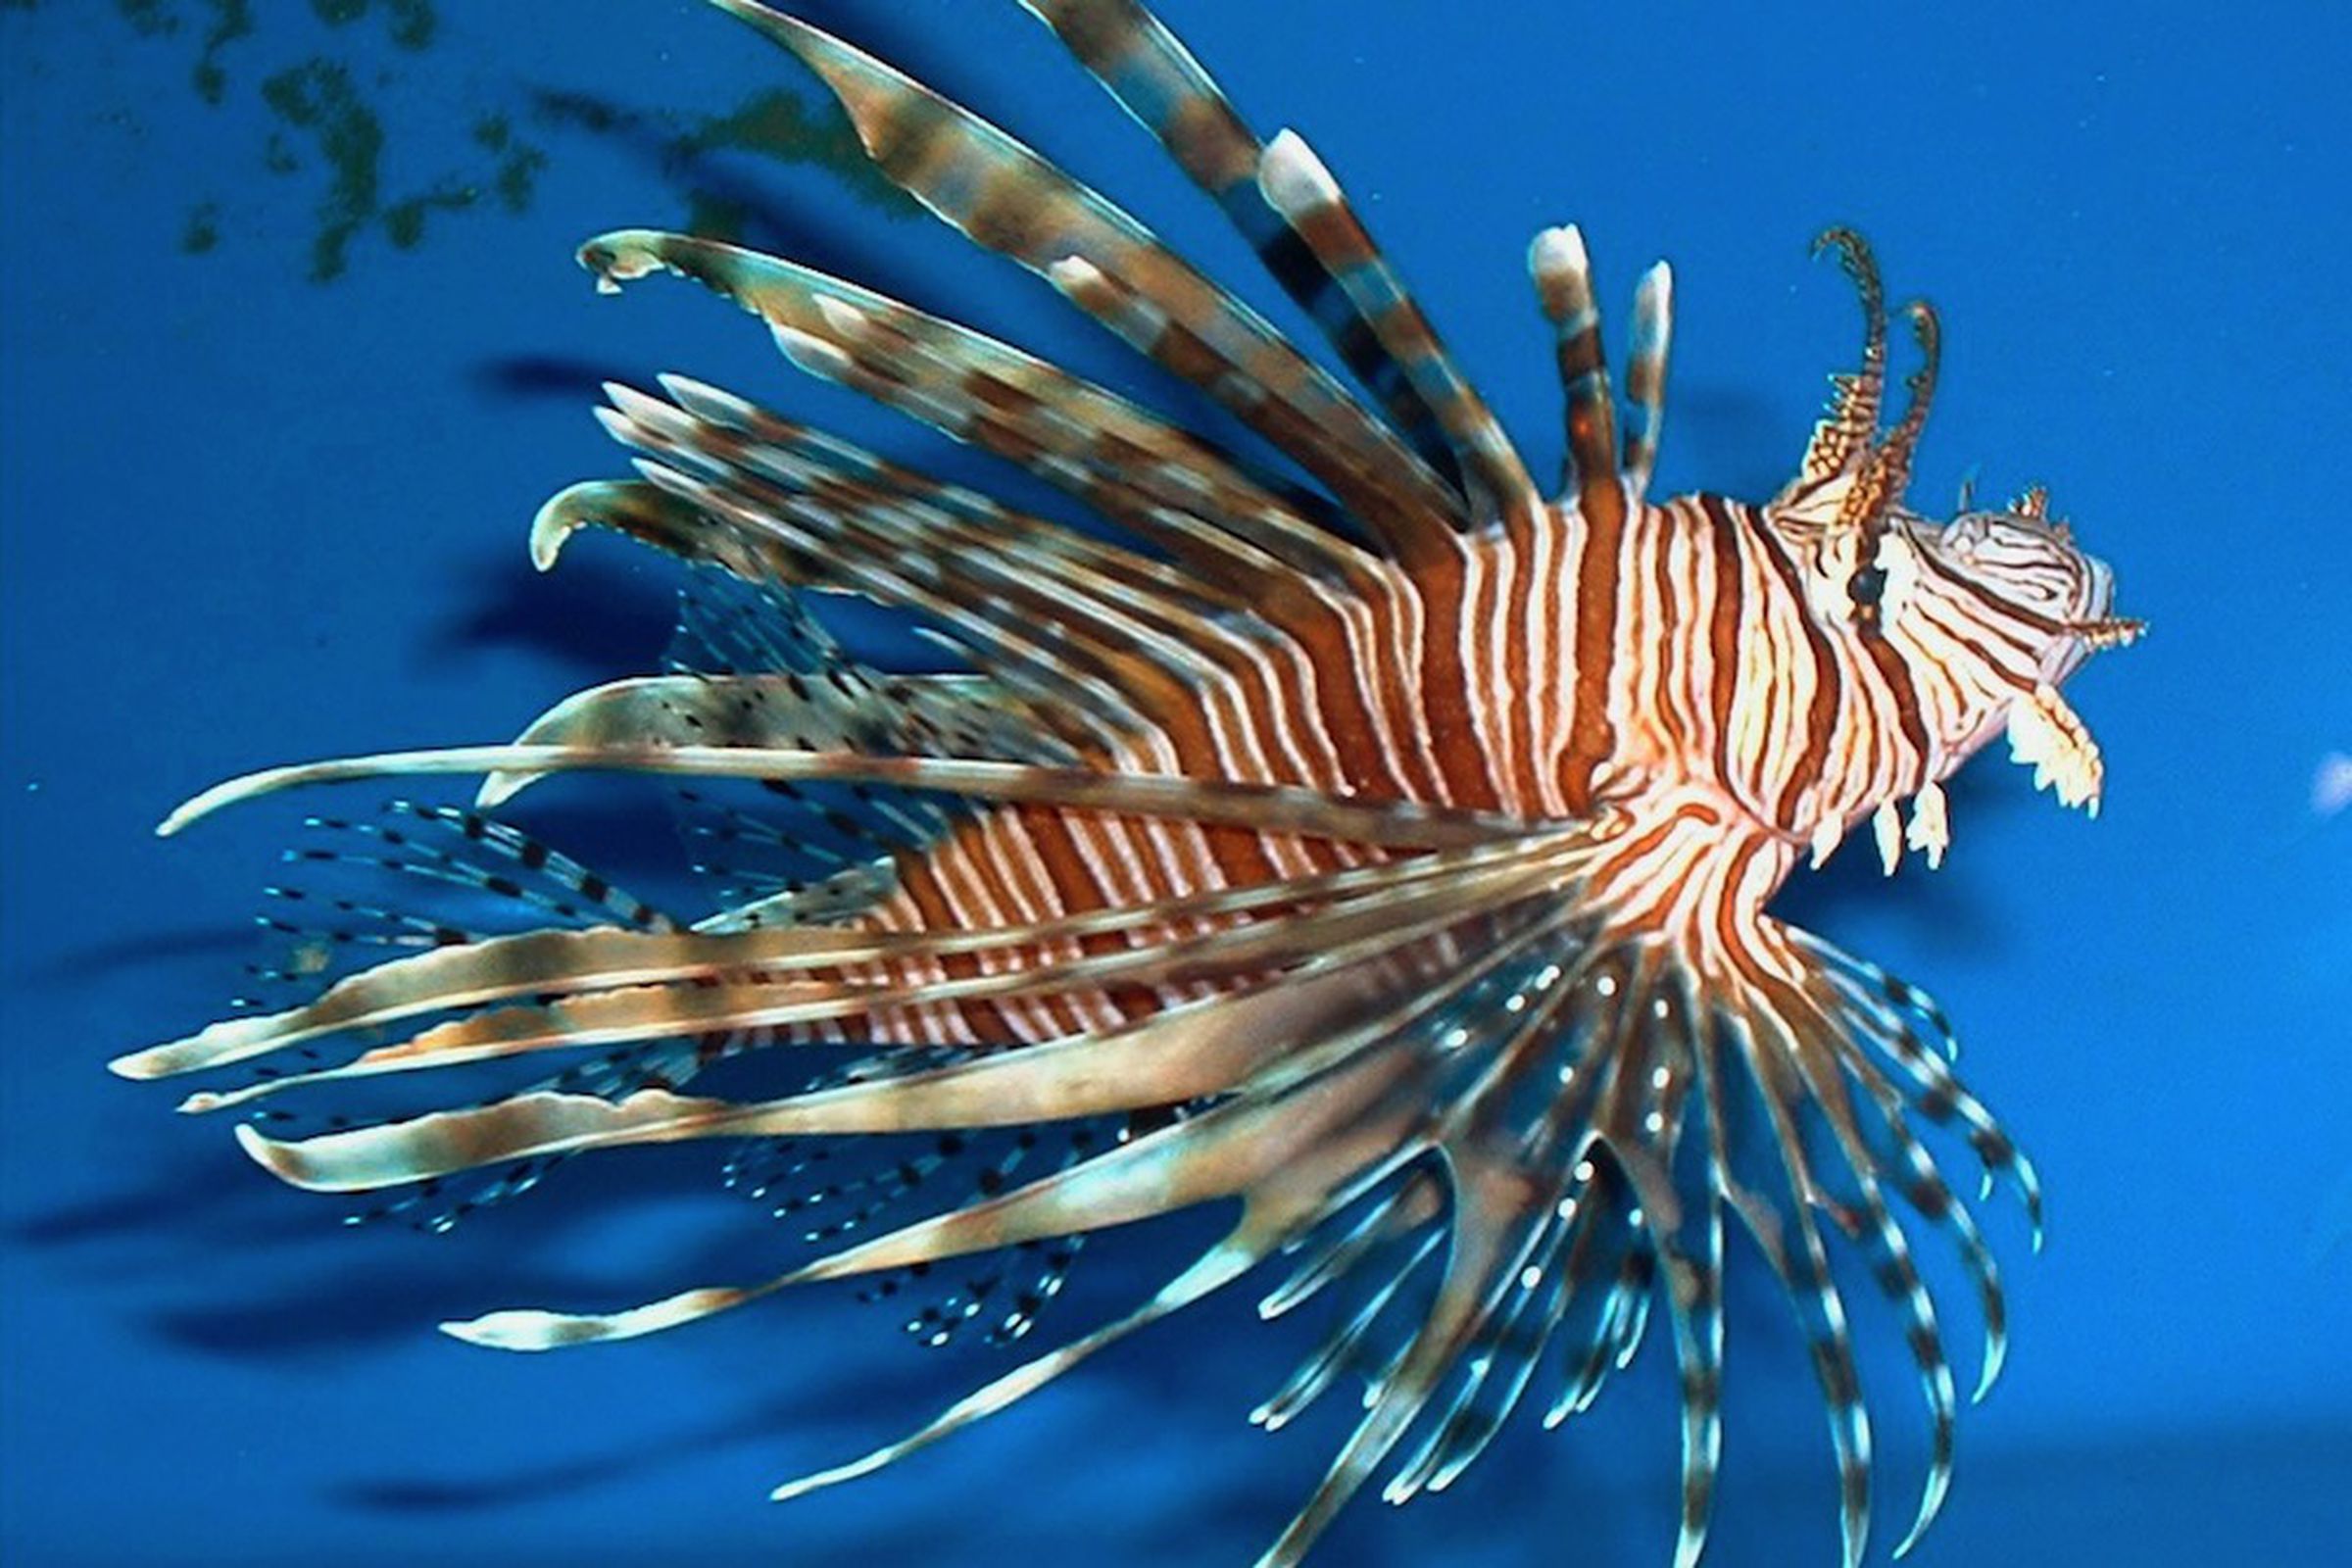 An adult Lionfish, an invasive species in the US, native to the Indian Ocean and South Pacific